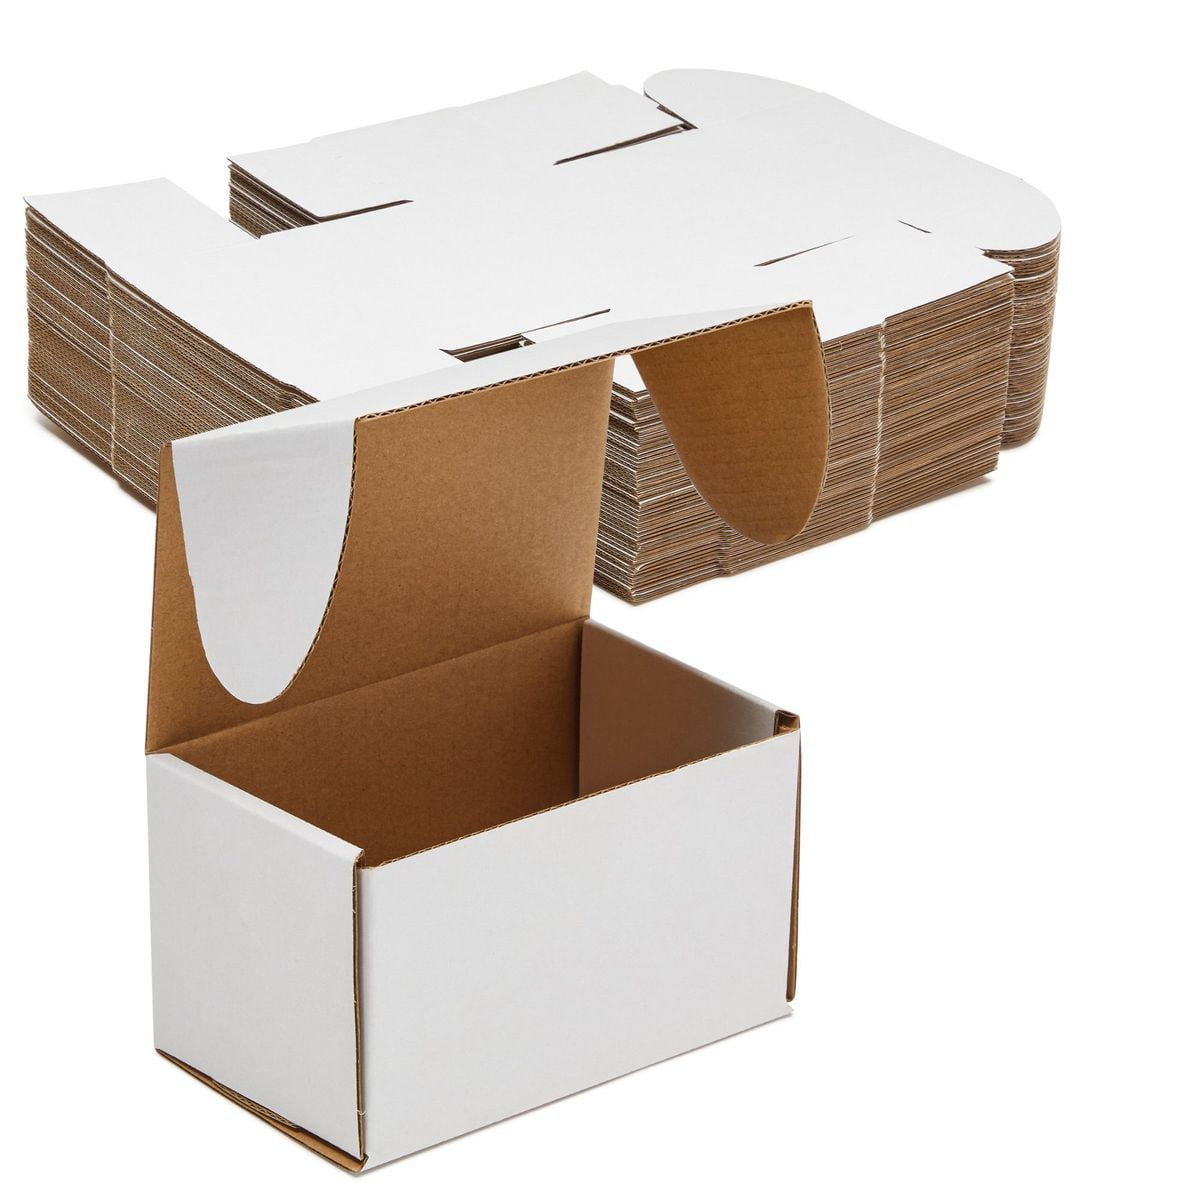 150-5x3x3 White Corrugated Shipping Mailer Packing Box Boxes Mailers